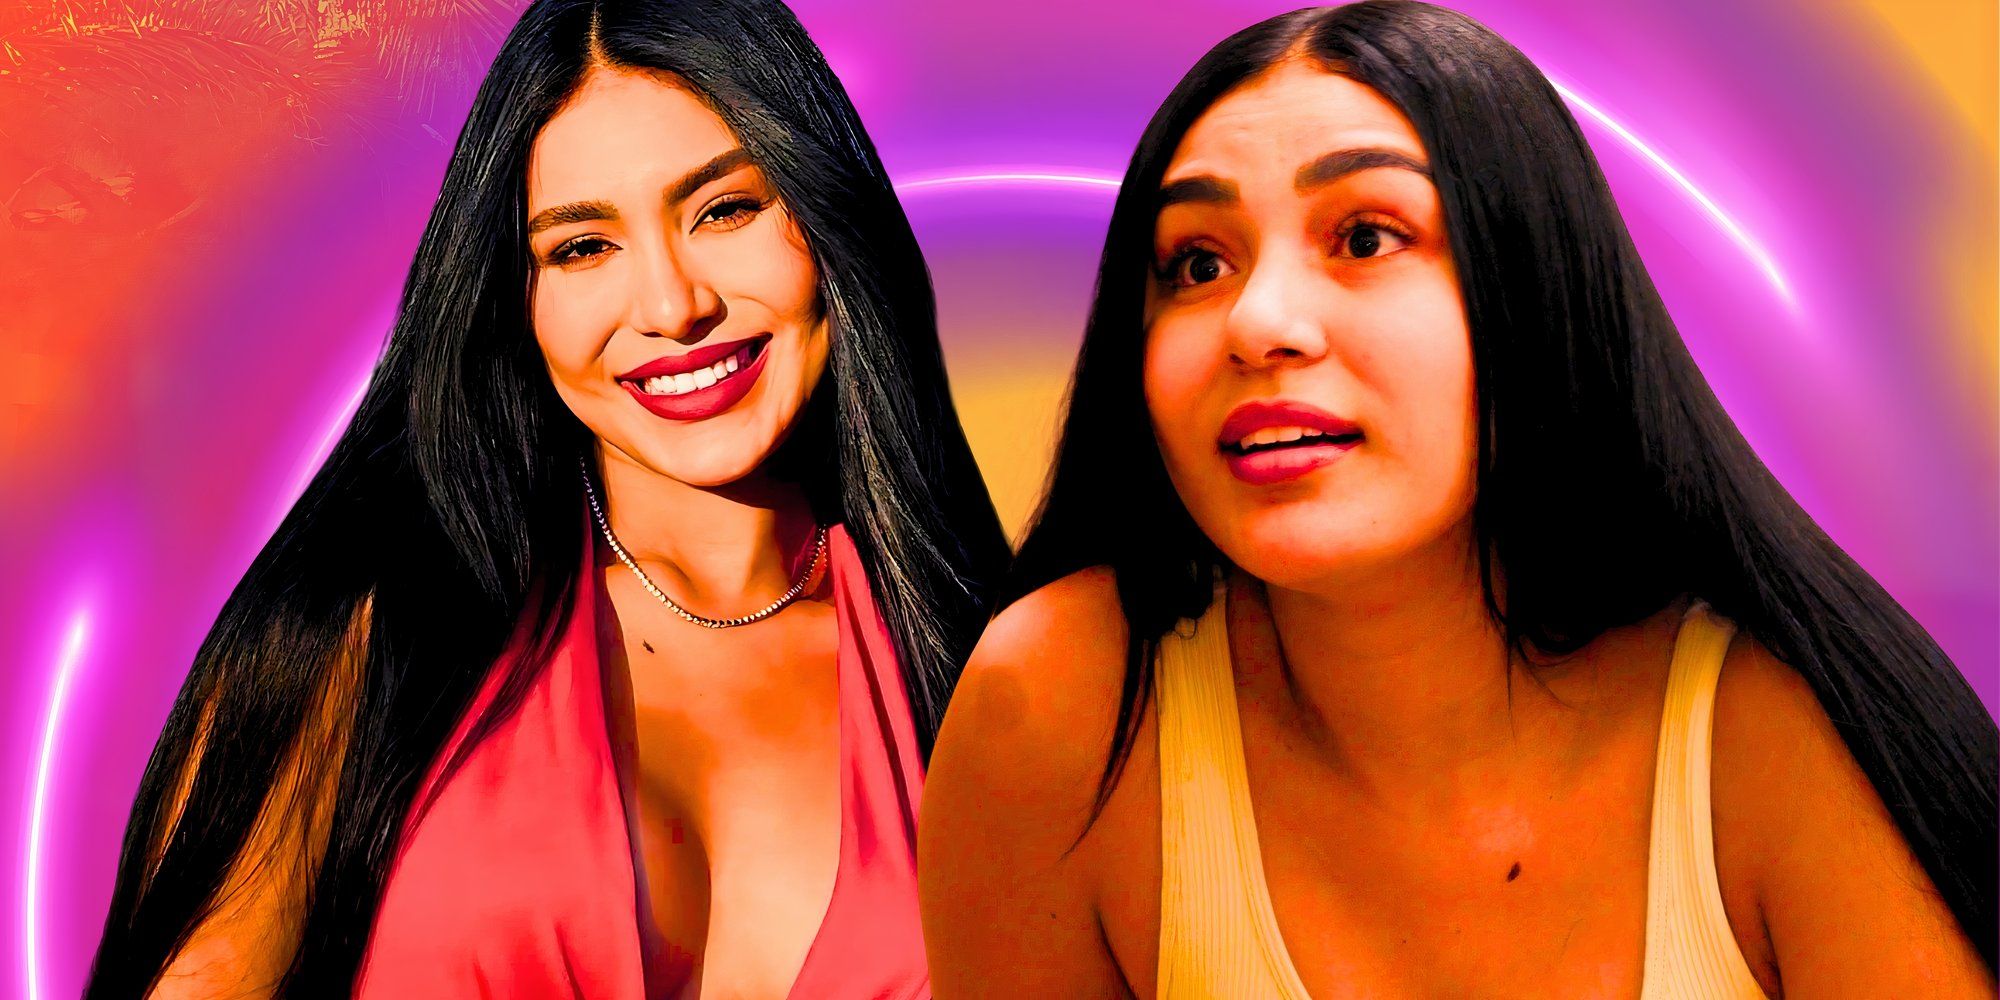 Montage Of Thaís Ramone from 90 Day Fiancé wearing a red dress and smiling 